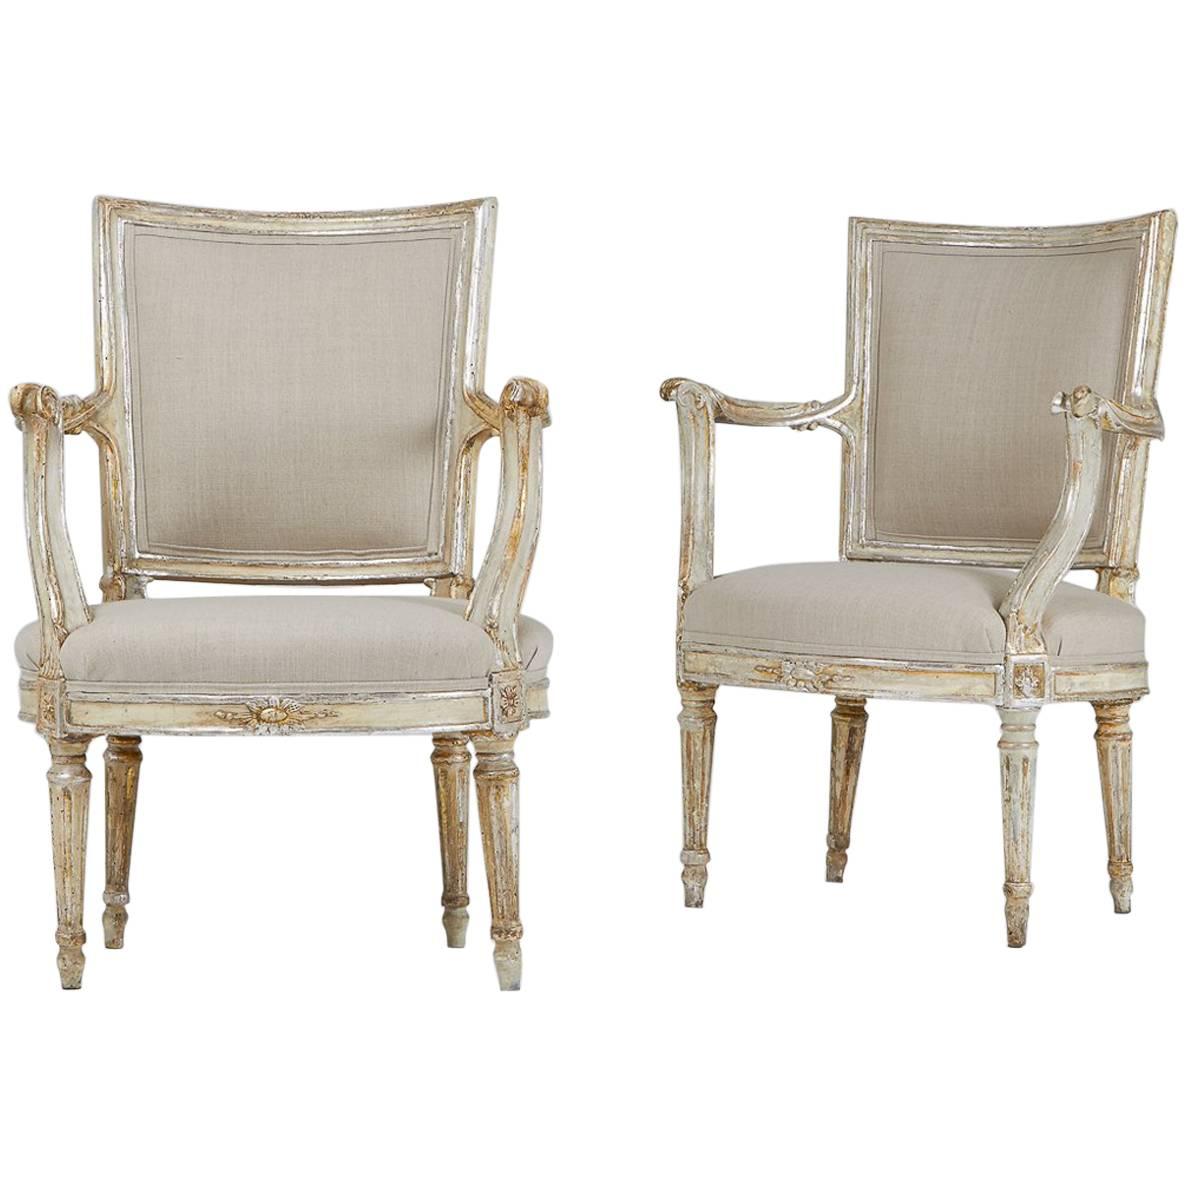 Pair of 18th Century Silver Gilt Chairs